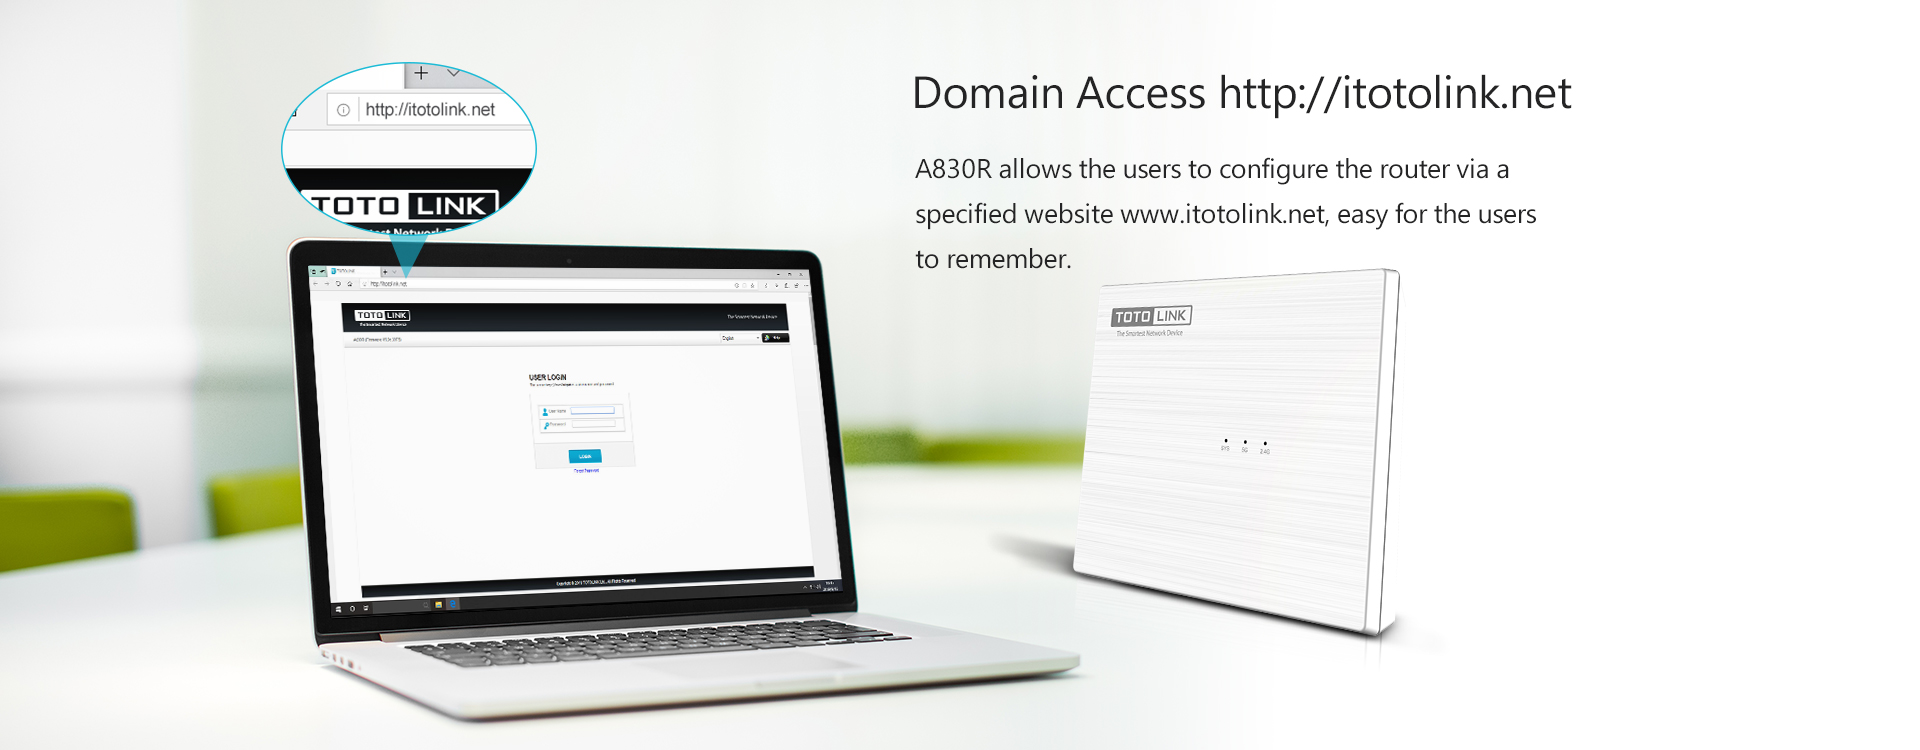 domain access for router configuration